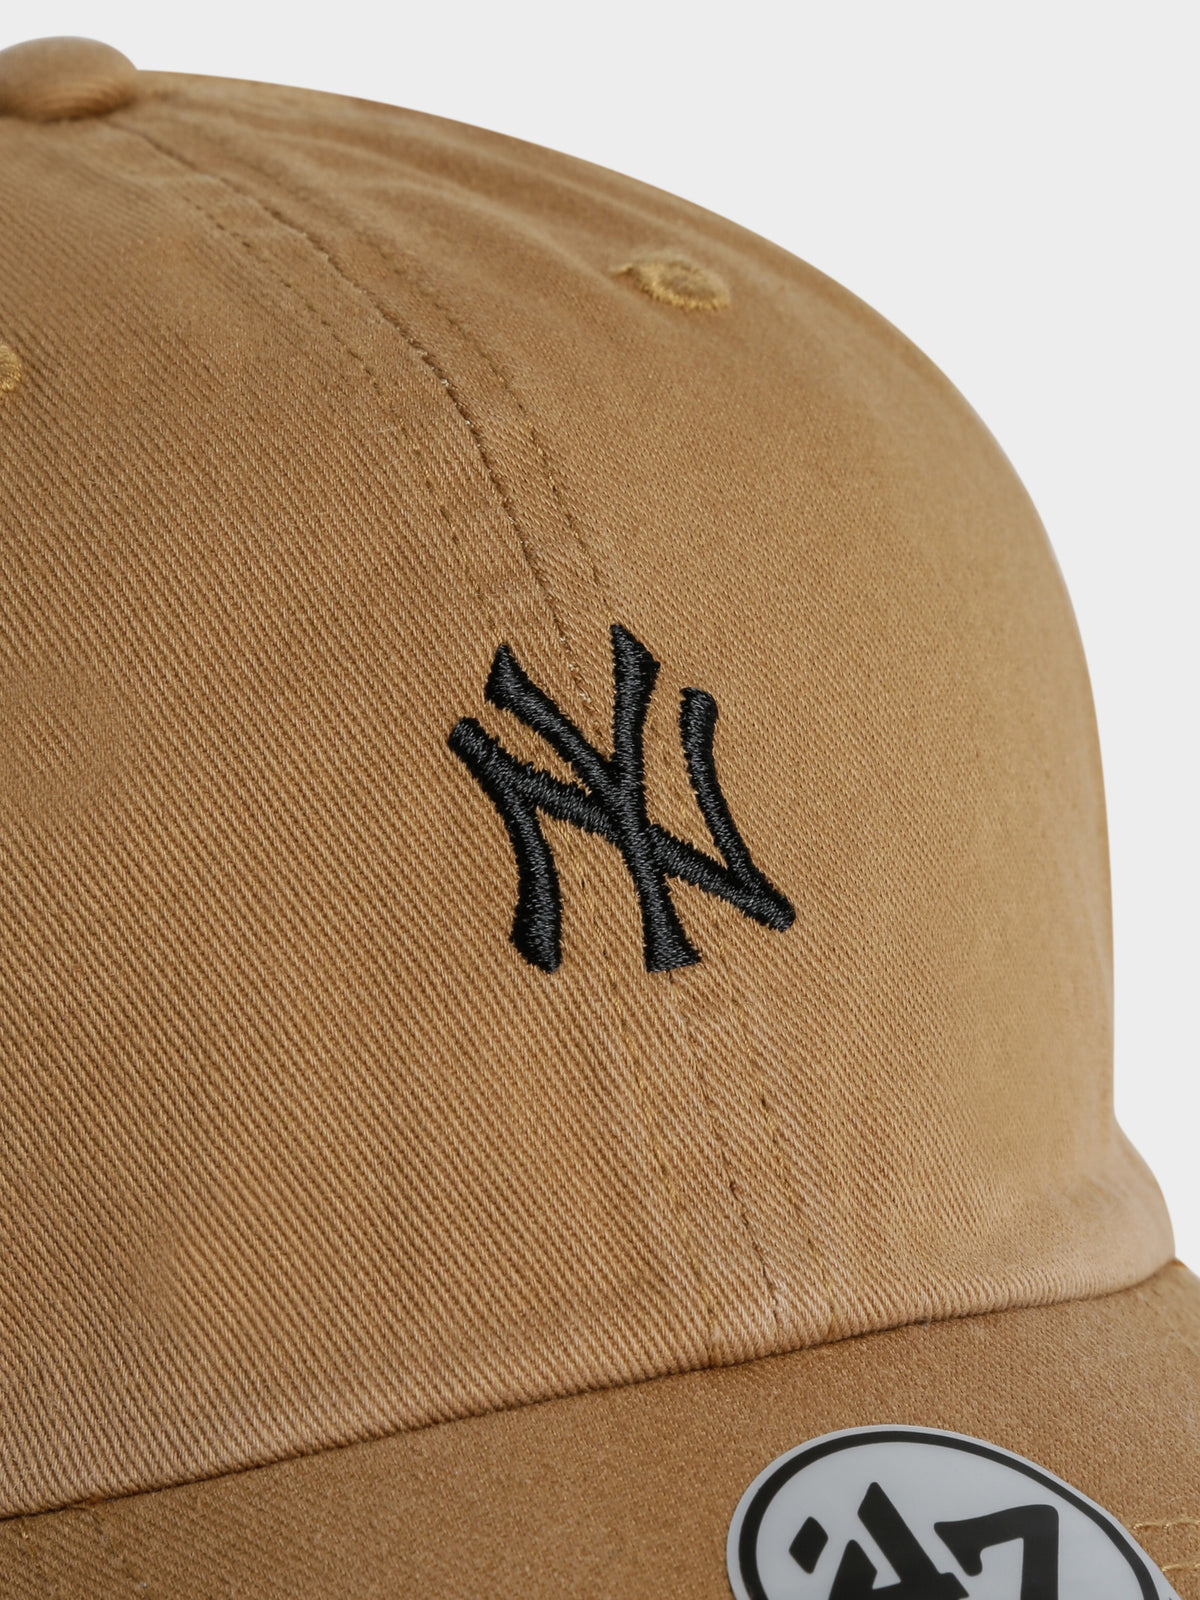 NY Yankees 47 Clean Up Cap in Camel